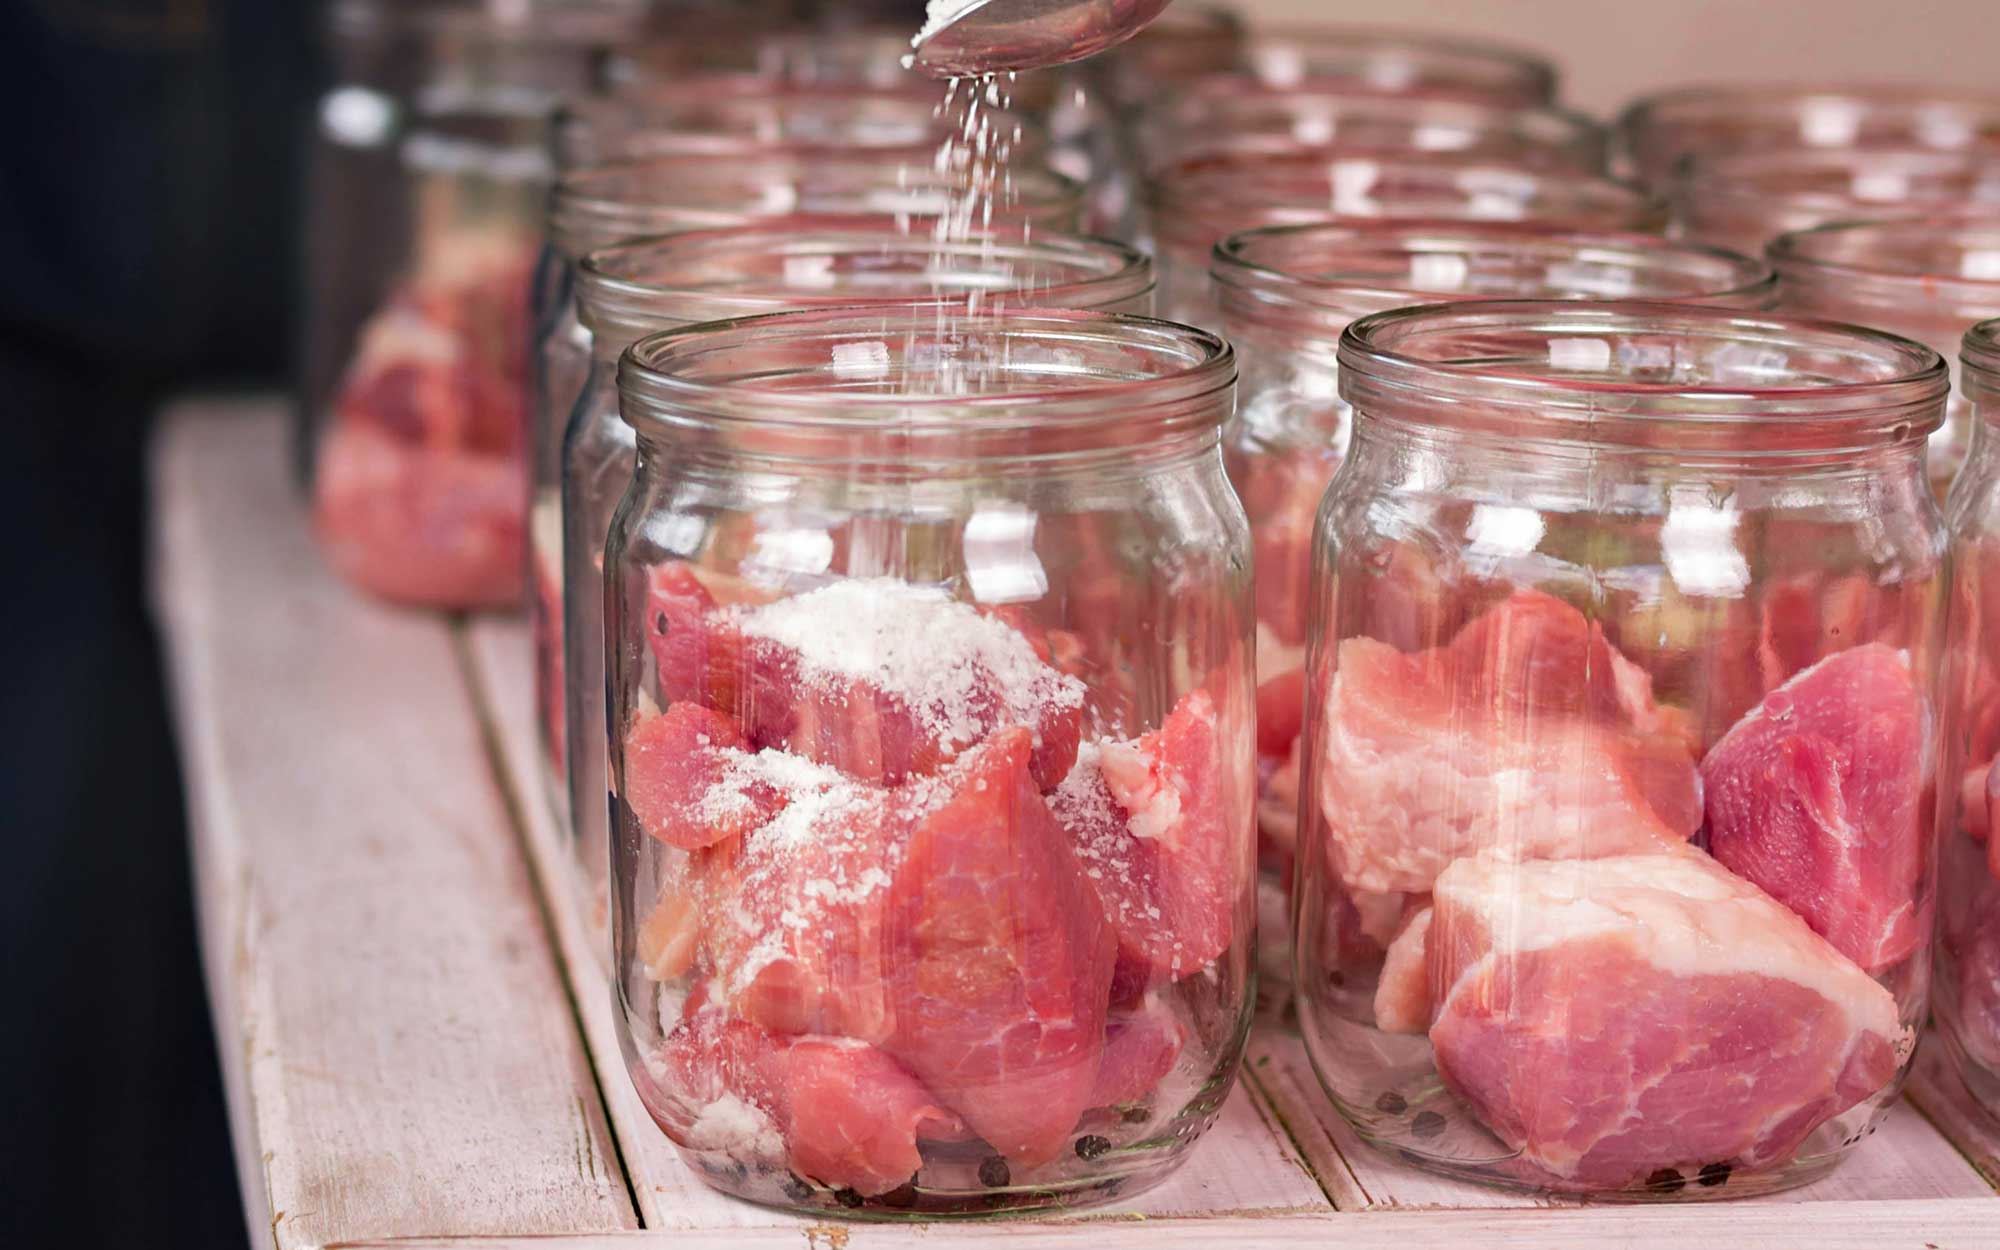 Several jars of meat being prepared for home canning.